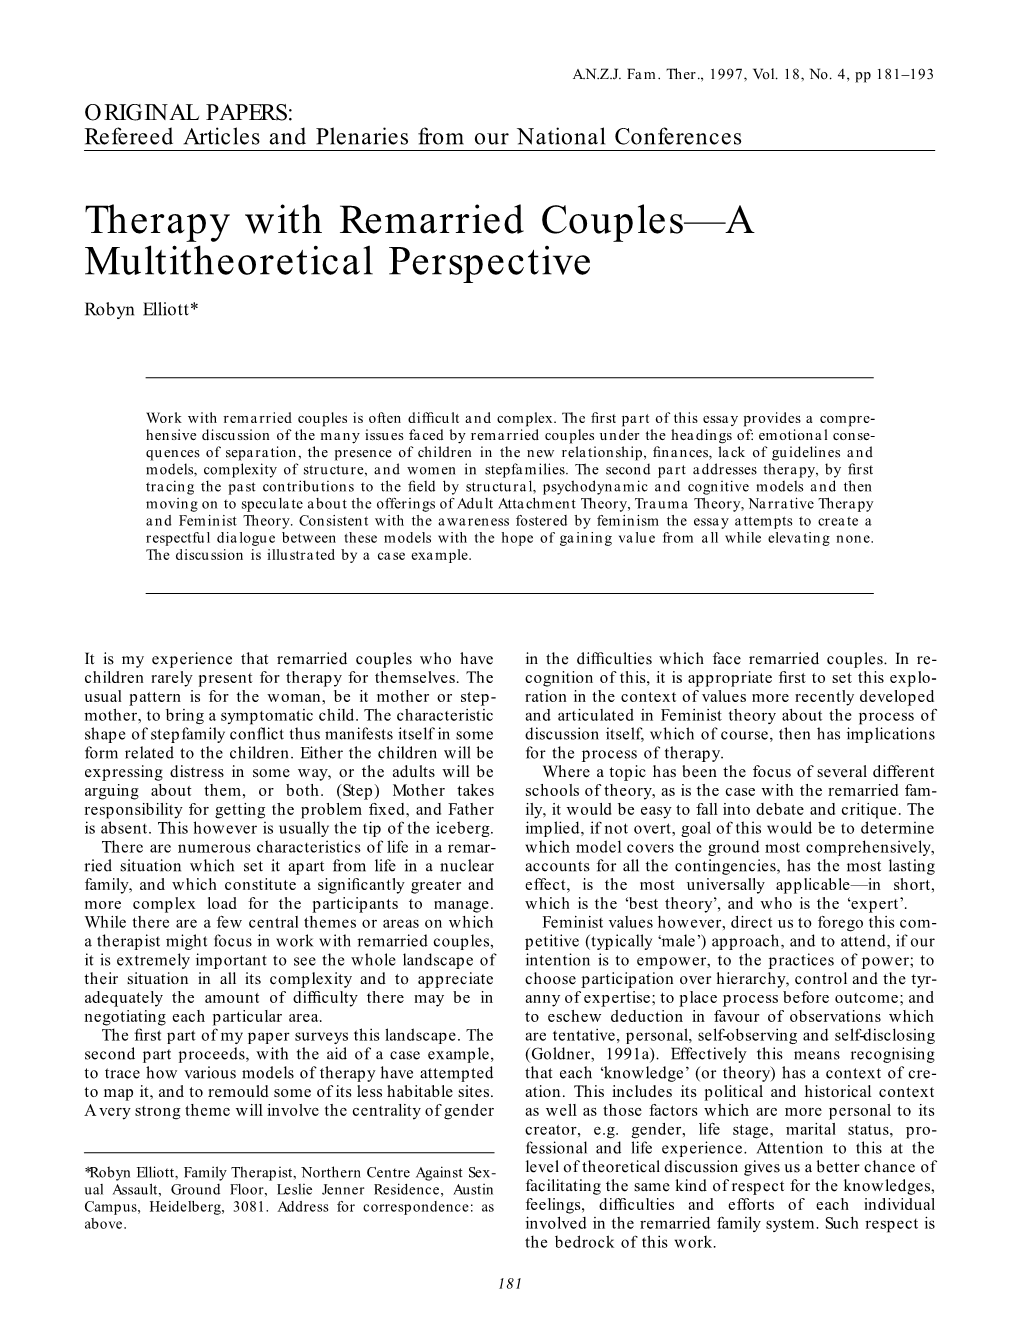 Therapy with Remarried Couples—A Multitheoretical Perspective Robyn Elliott*